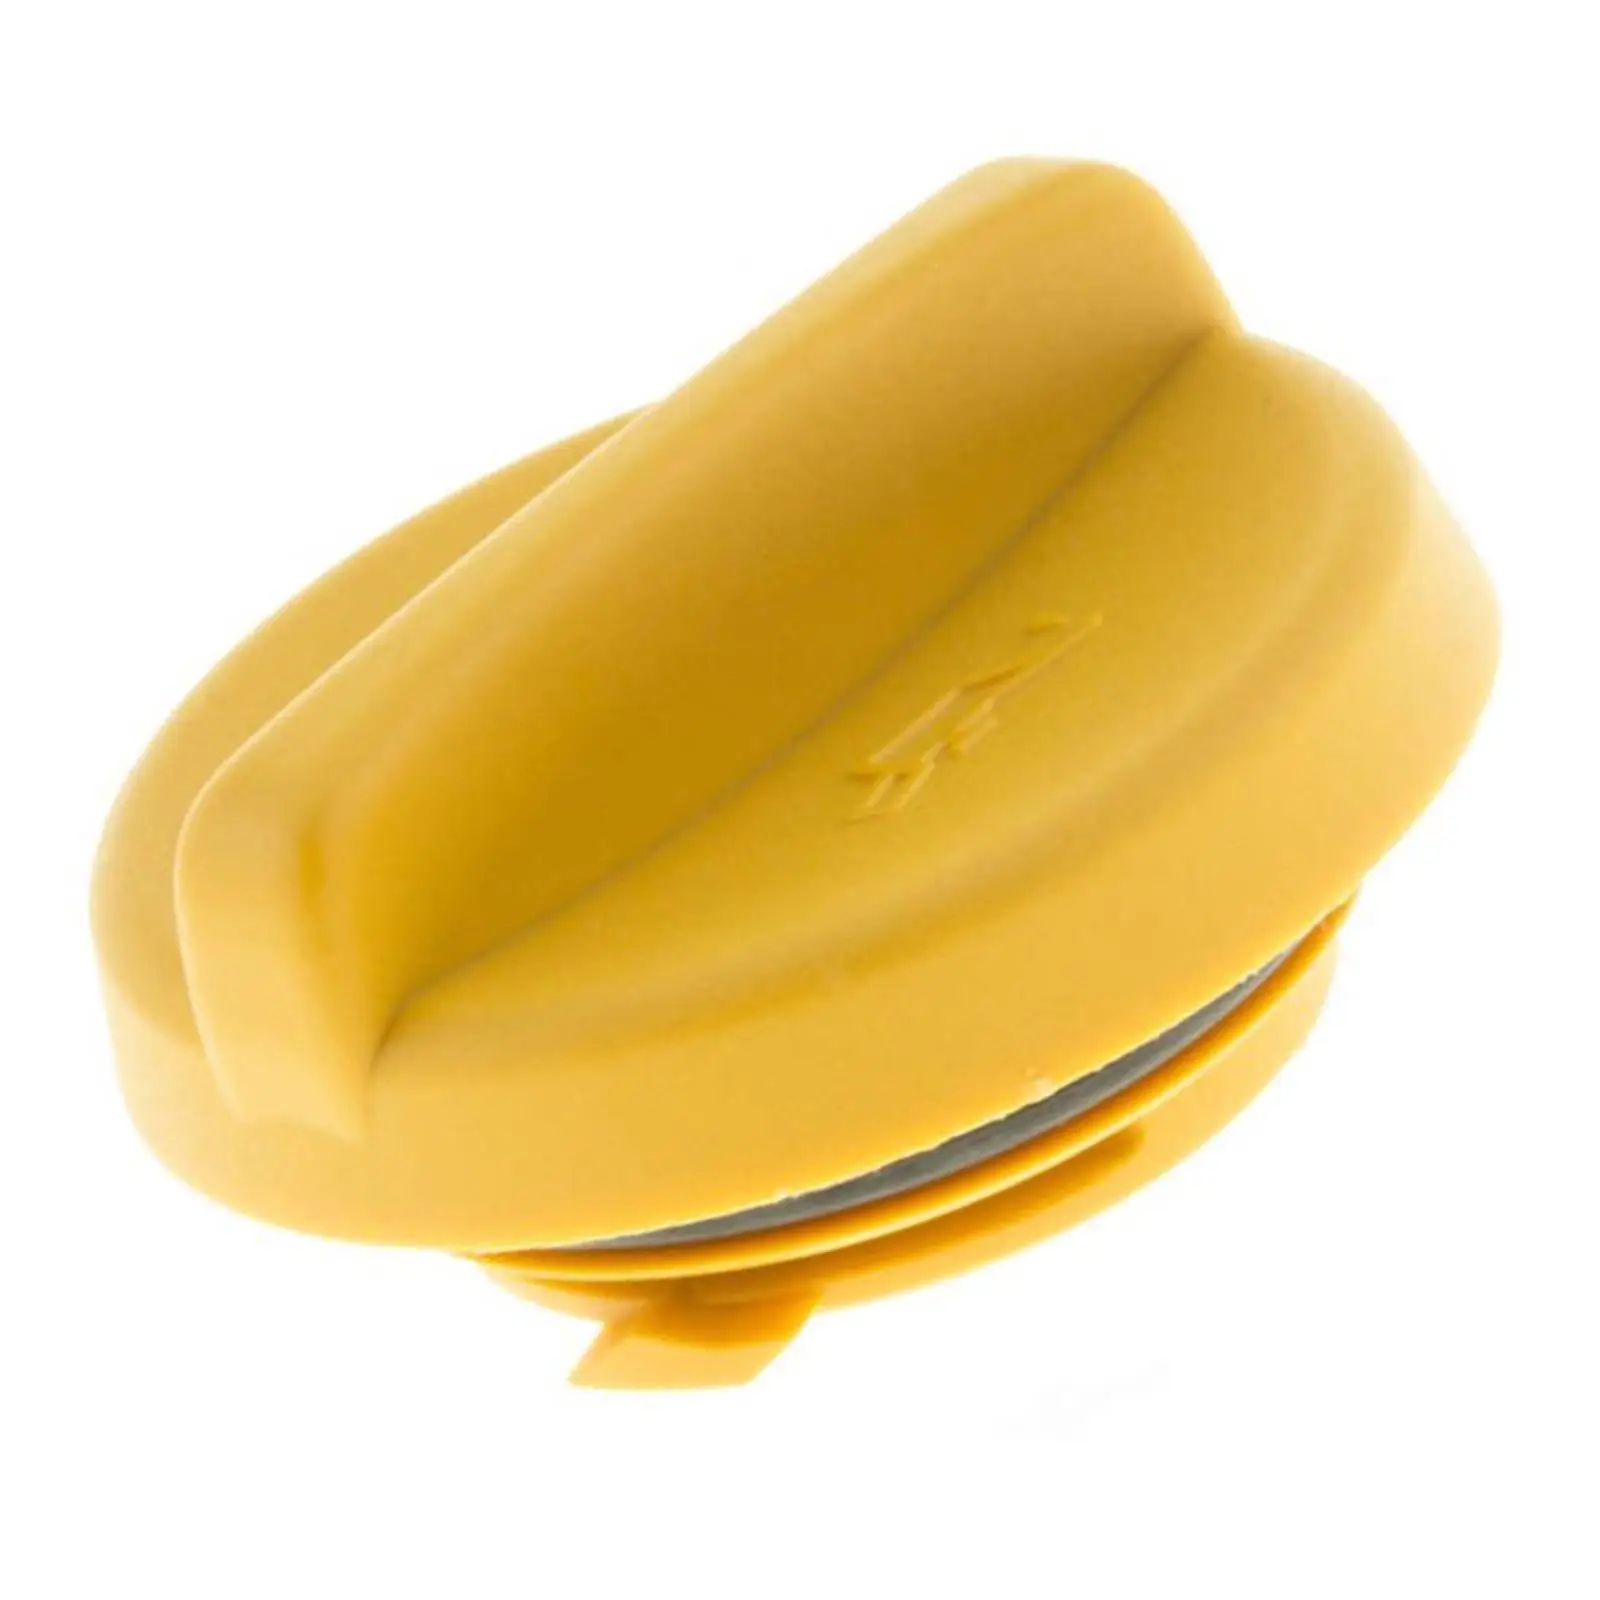 Engine Oil Filler Cap 90412508 90412509 650090 5650831 Replaces Vehicle Repair Parts Yellow for ASTRA Vauxhall Meriva Corsa